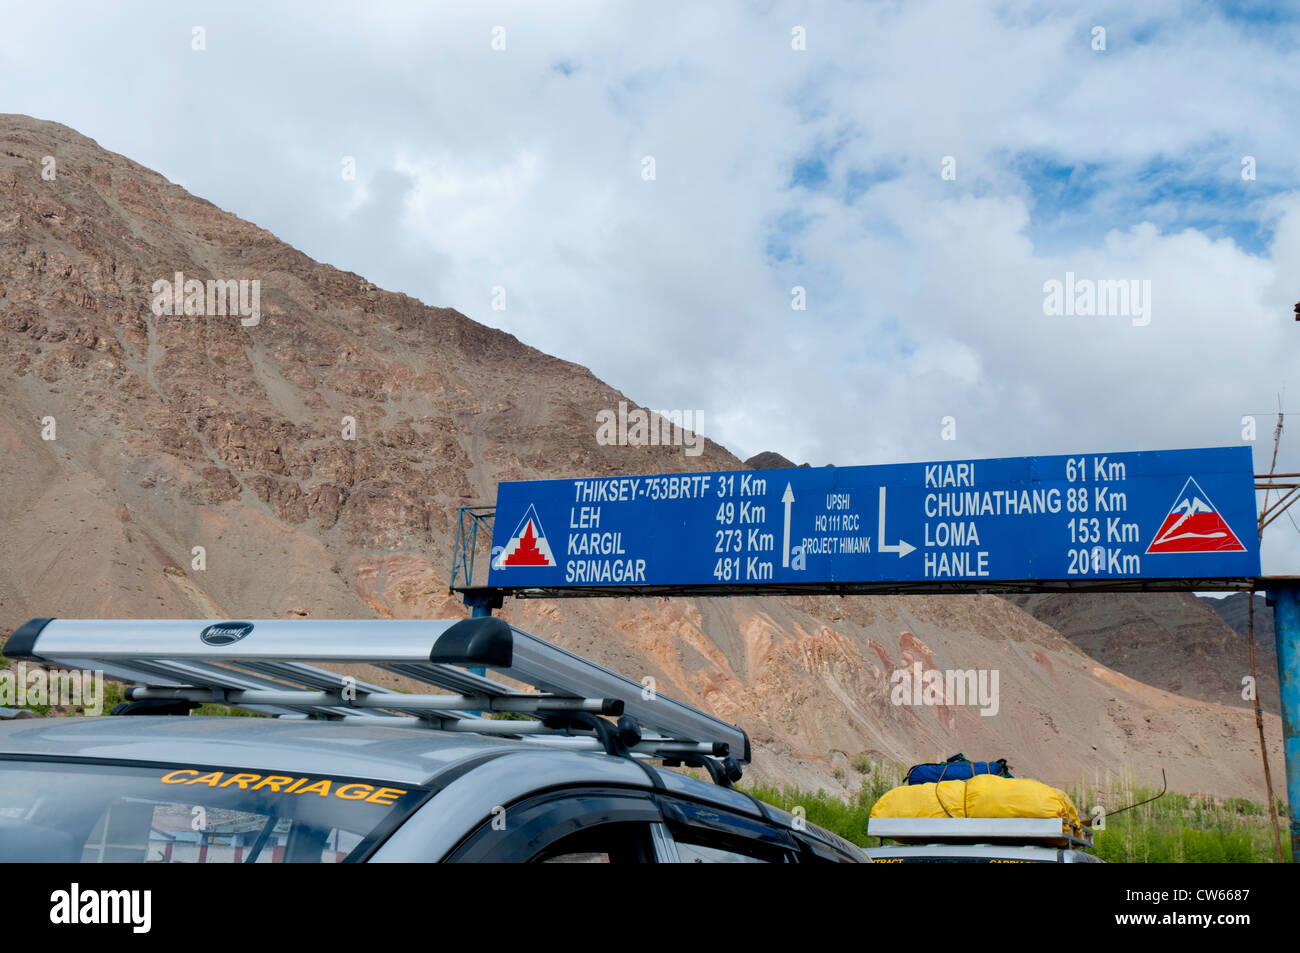 Project Himank mileage sign in a town on the Leh-Manali Highway in Ladakh, India Stock Photo